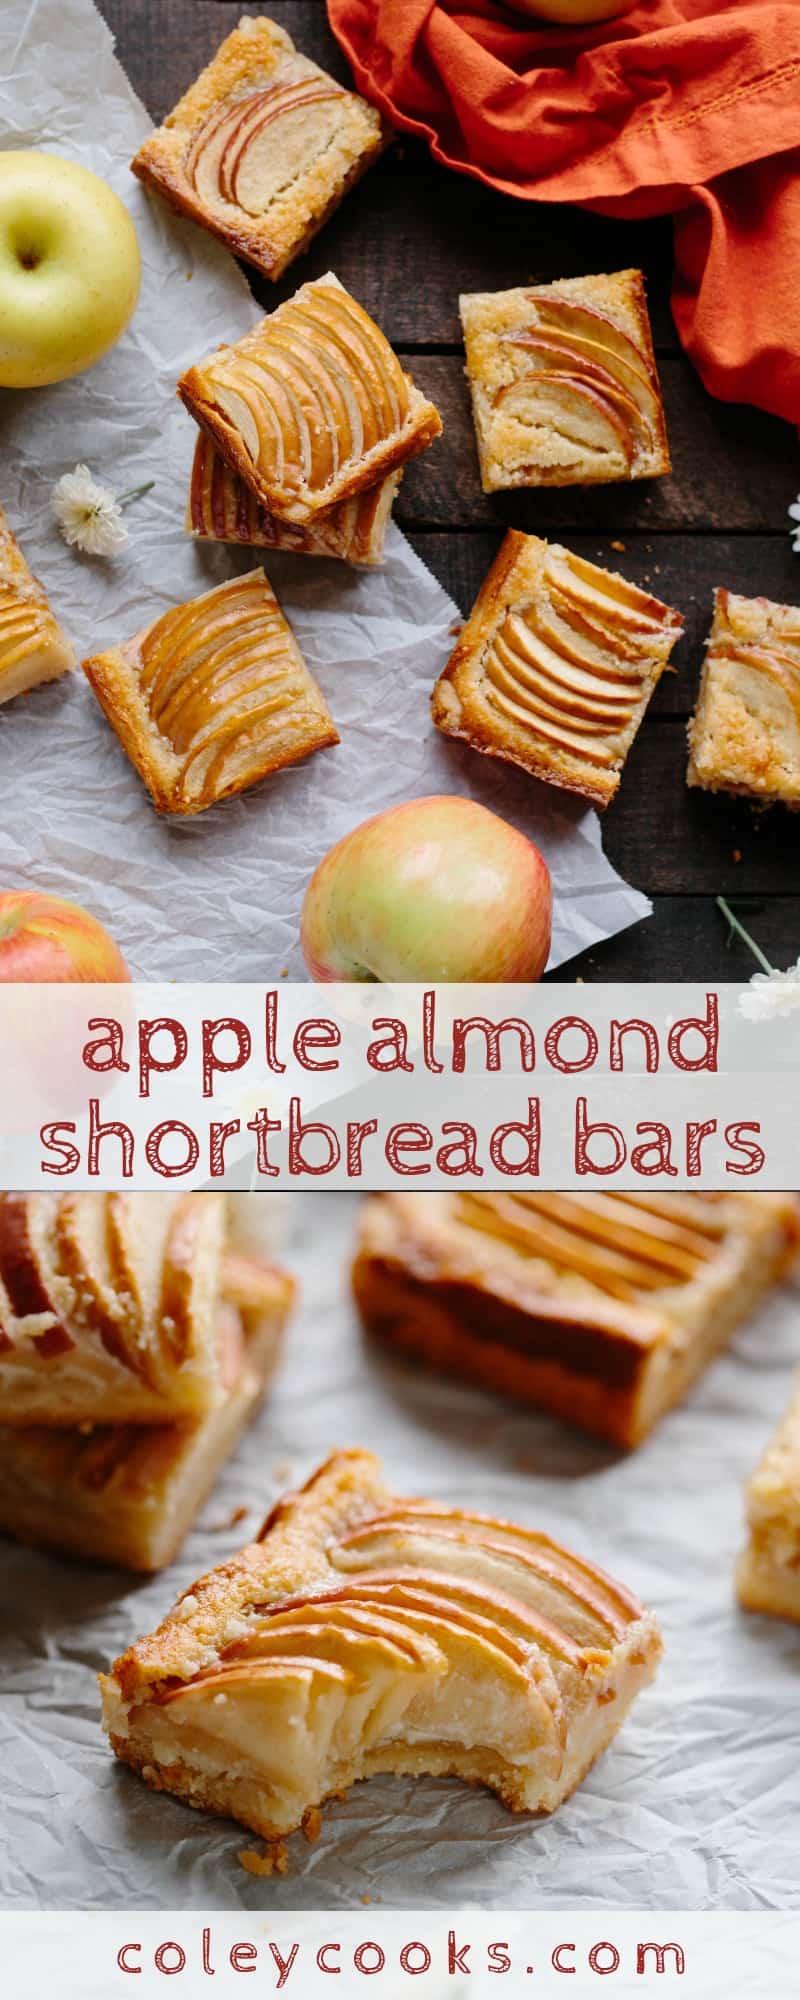 APPLE ALMOND SHORTBREAD BARS | Easy fall dessert recipe! Buttery shortbread crust with almond frangipane and tart apples baked in. #easy #fall #recipe #dessert #bars #cookies #apple #almond #frangipane | ColeyCooks.com